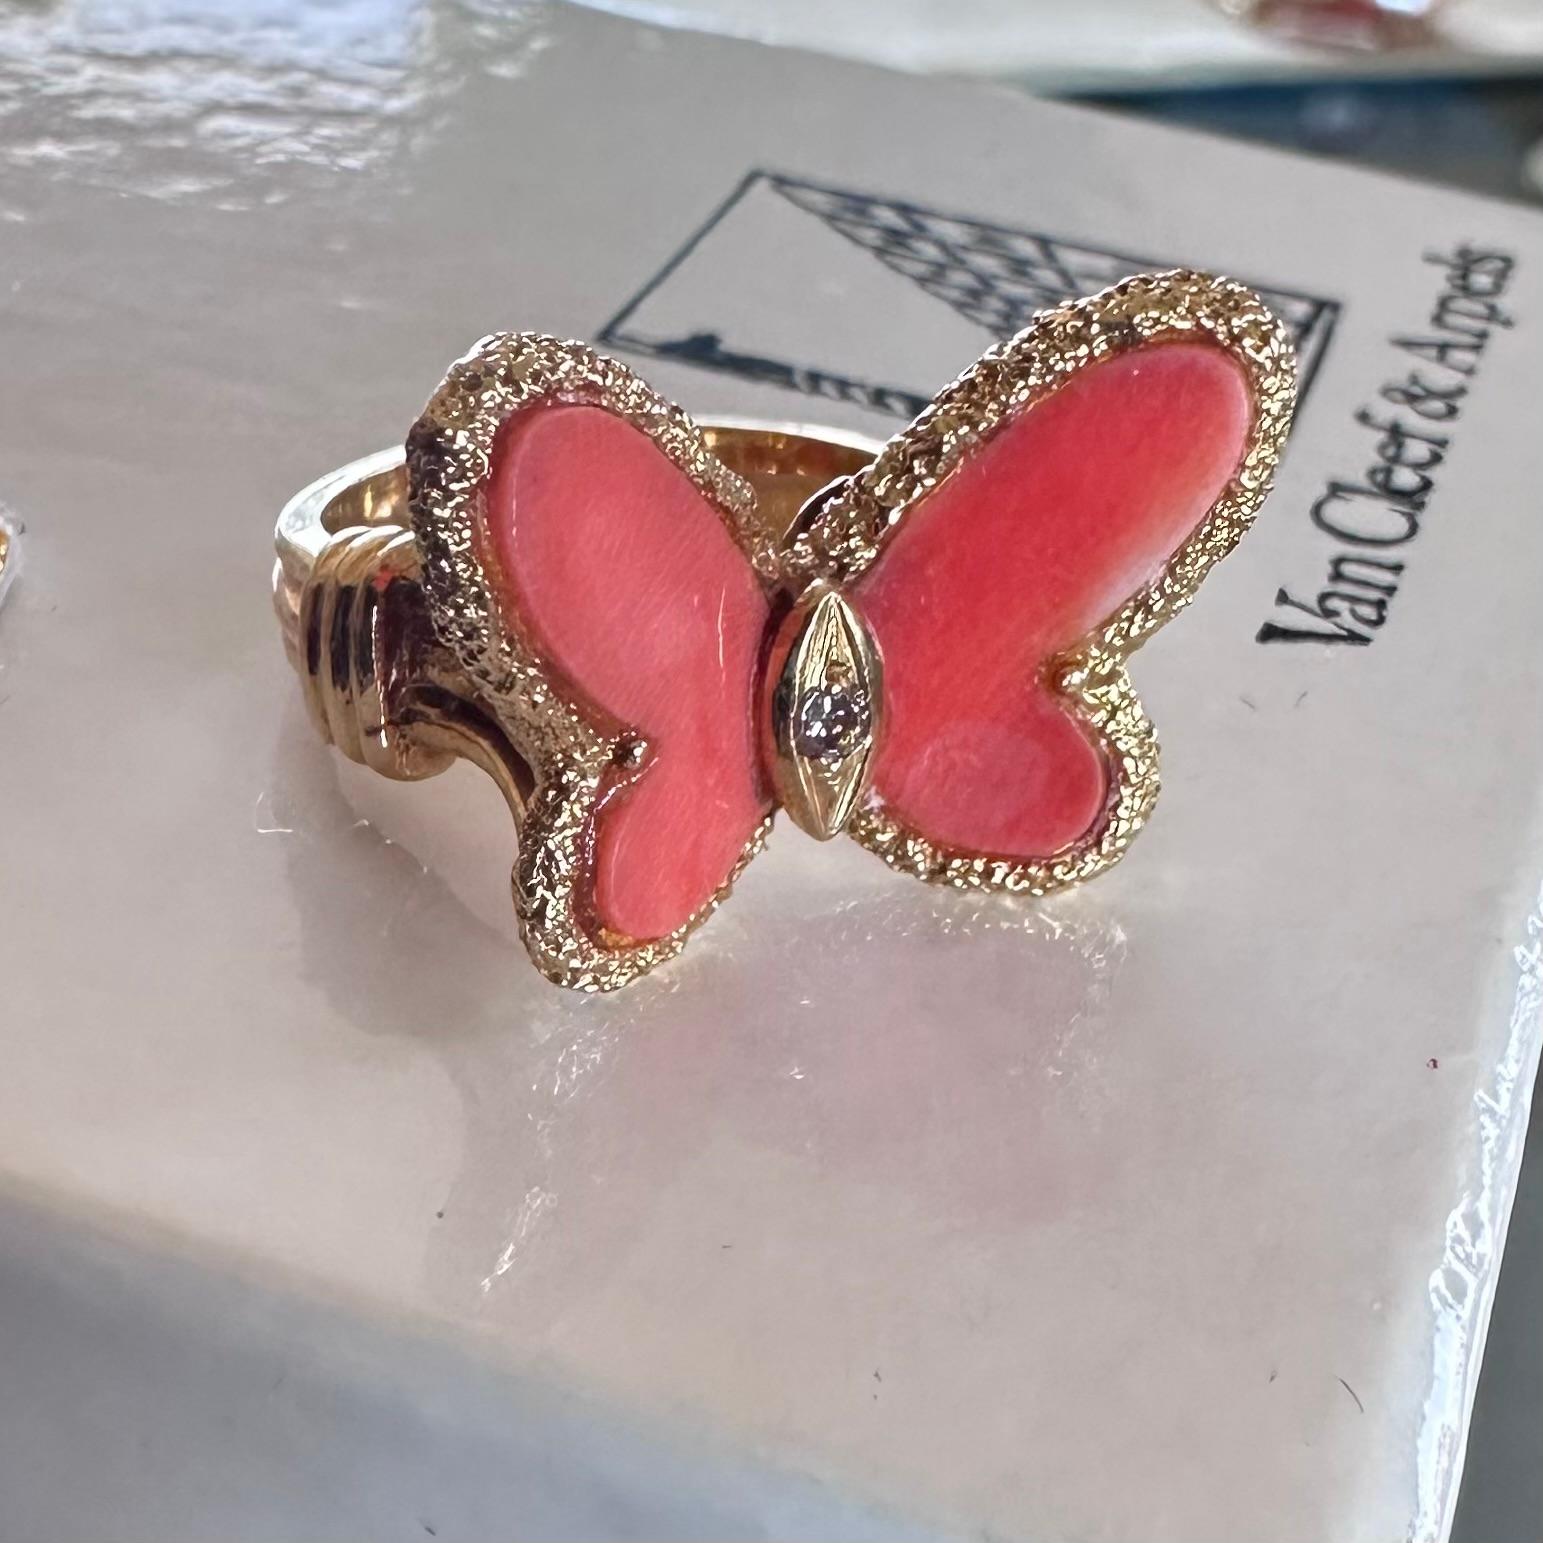 A beautiful Vintage 18k Yellow gold Coral Motif Butterfly Ring by Van Cleef & Arpels. The ring is set with a centre butterfly motif of Coral inlay that is further complemented by a beaded outer edge. The Butterfly measures 16mm in height and 22mm in